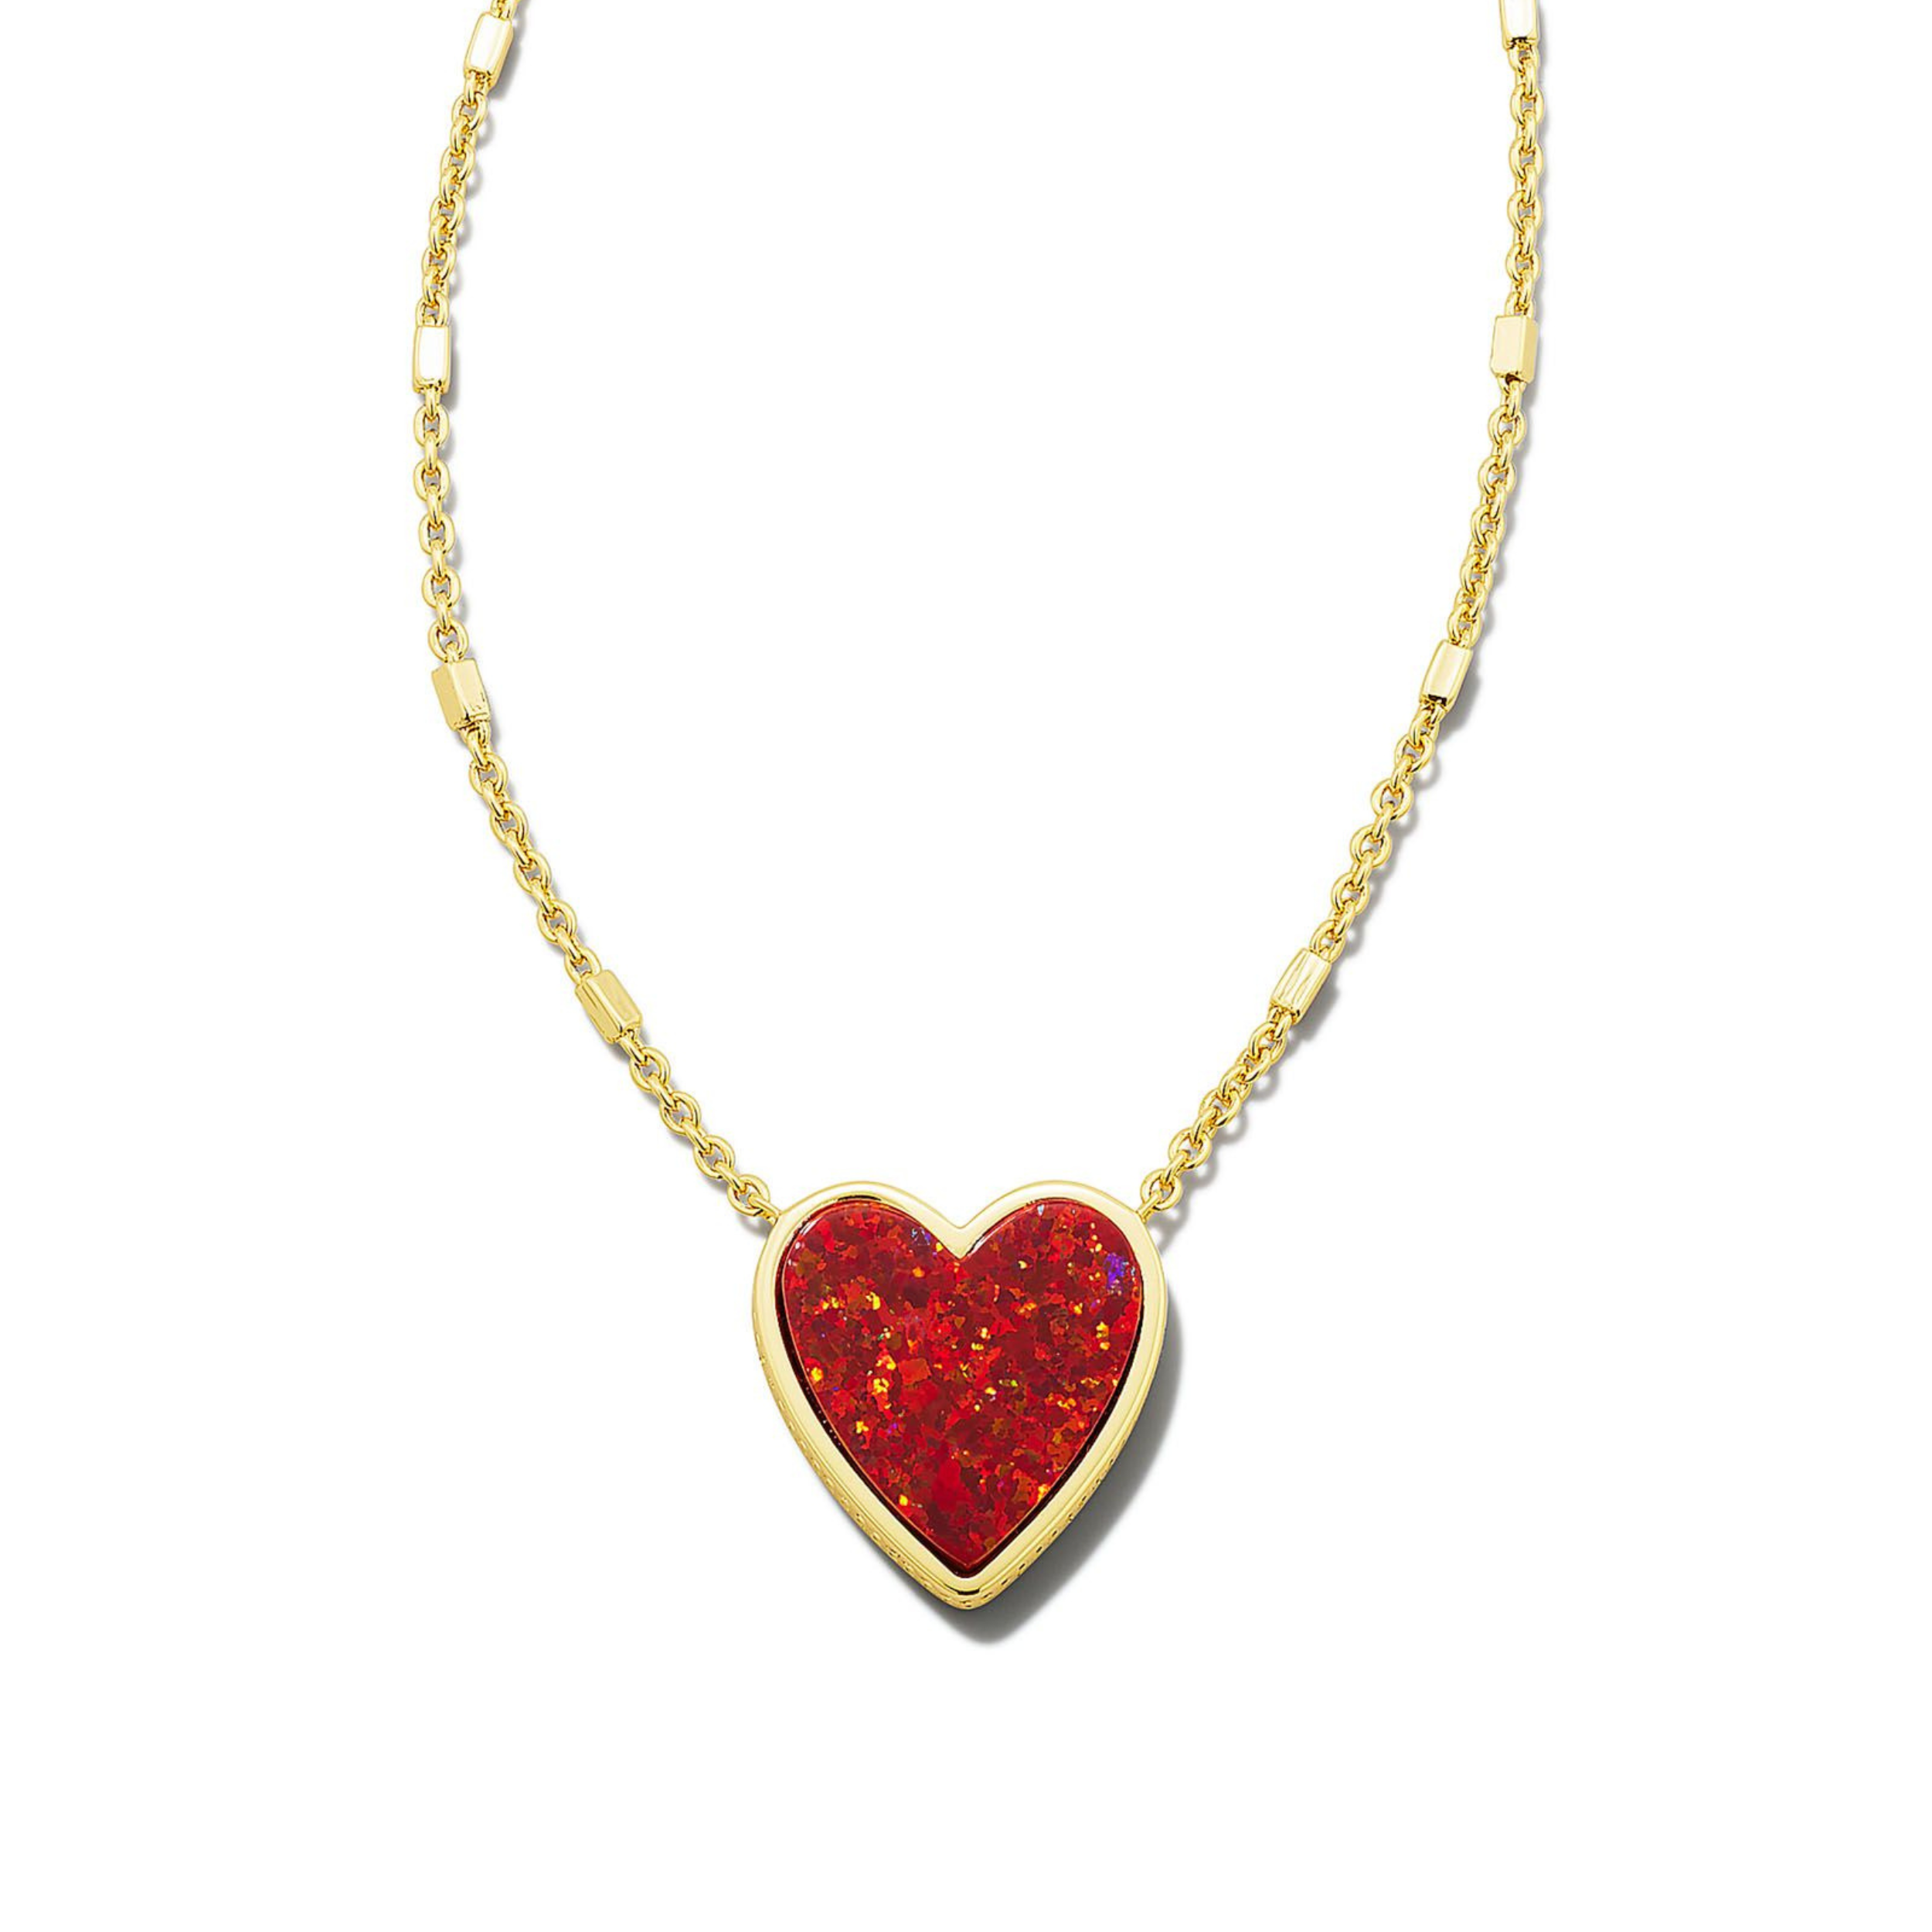 Kendra Scott | Heart Gold Pendant Necklace in Red Kyocera Opal - Giddy Up Glamour Boutique